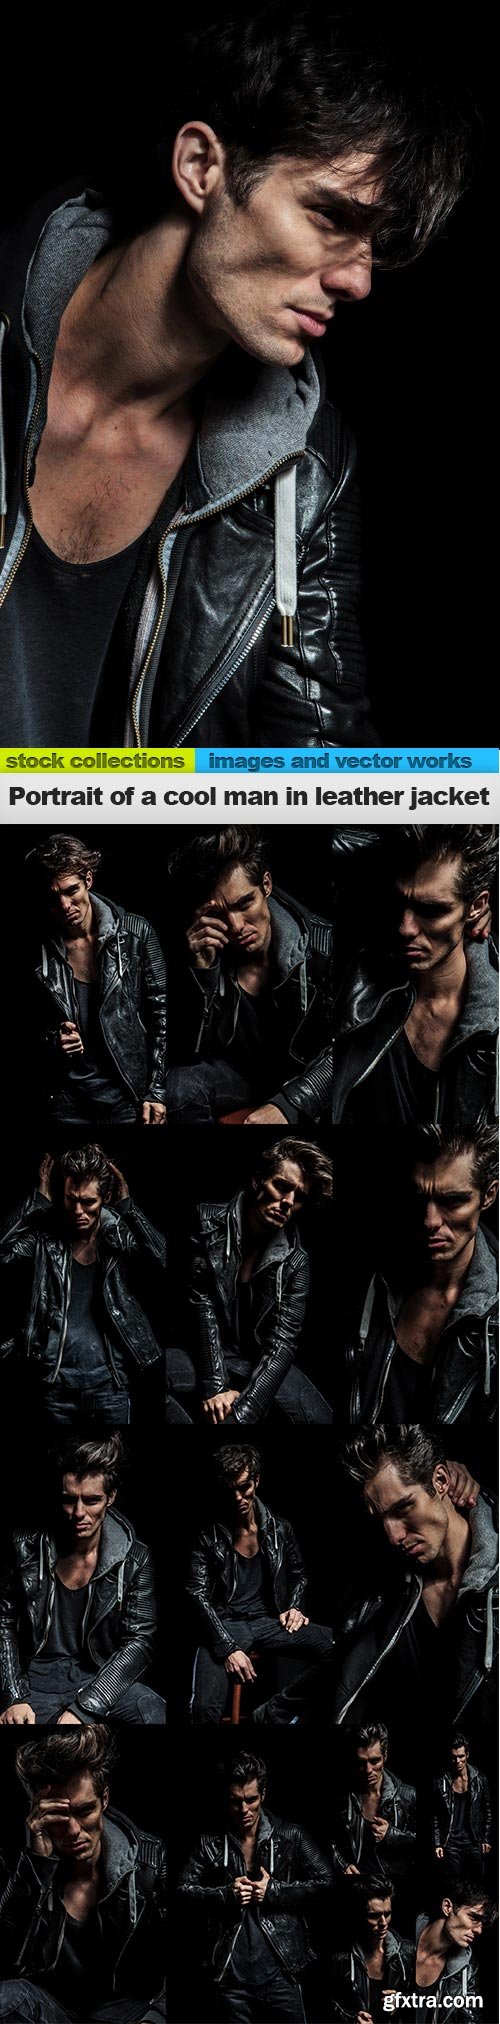 Portrait of a cool man in leather jacket, 15 x UHQ JPEG